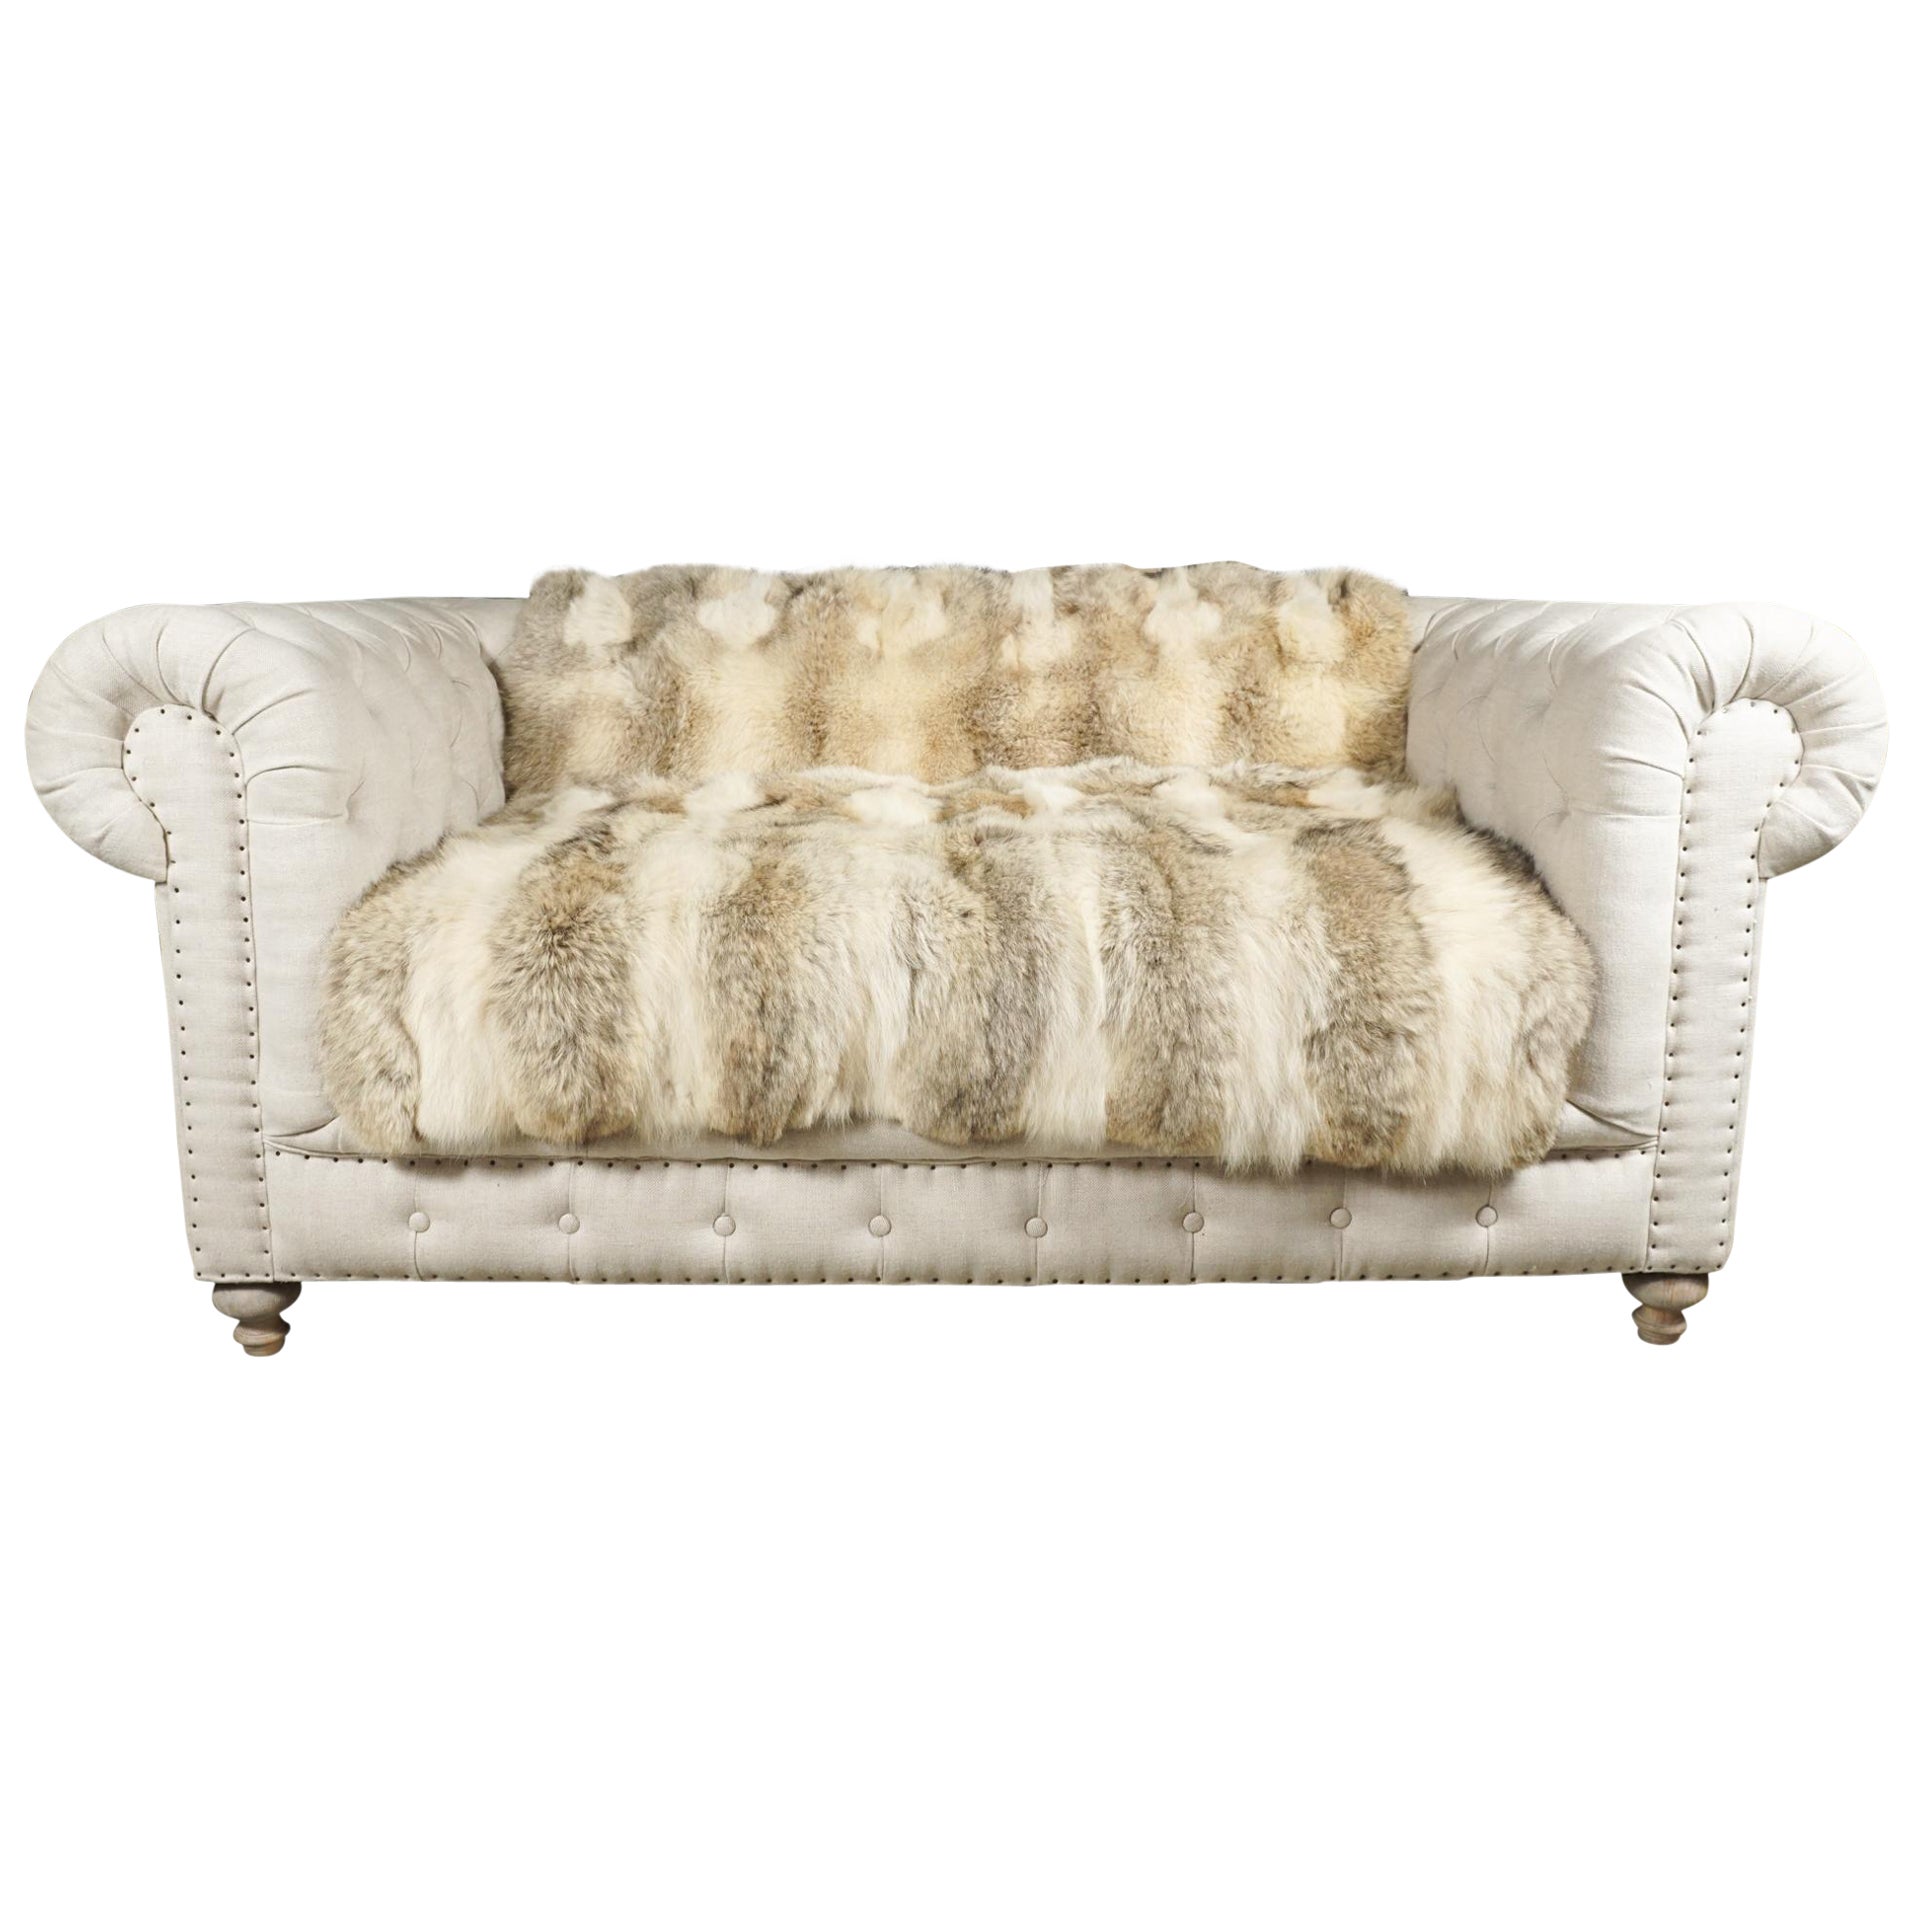 Vintage Edwardian Style Linen Upholstered Button Tufted Chesterfield Sofa For Sale